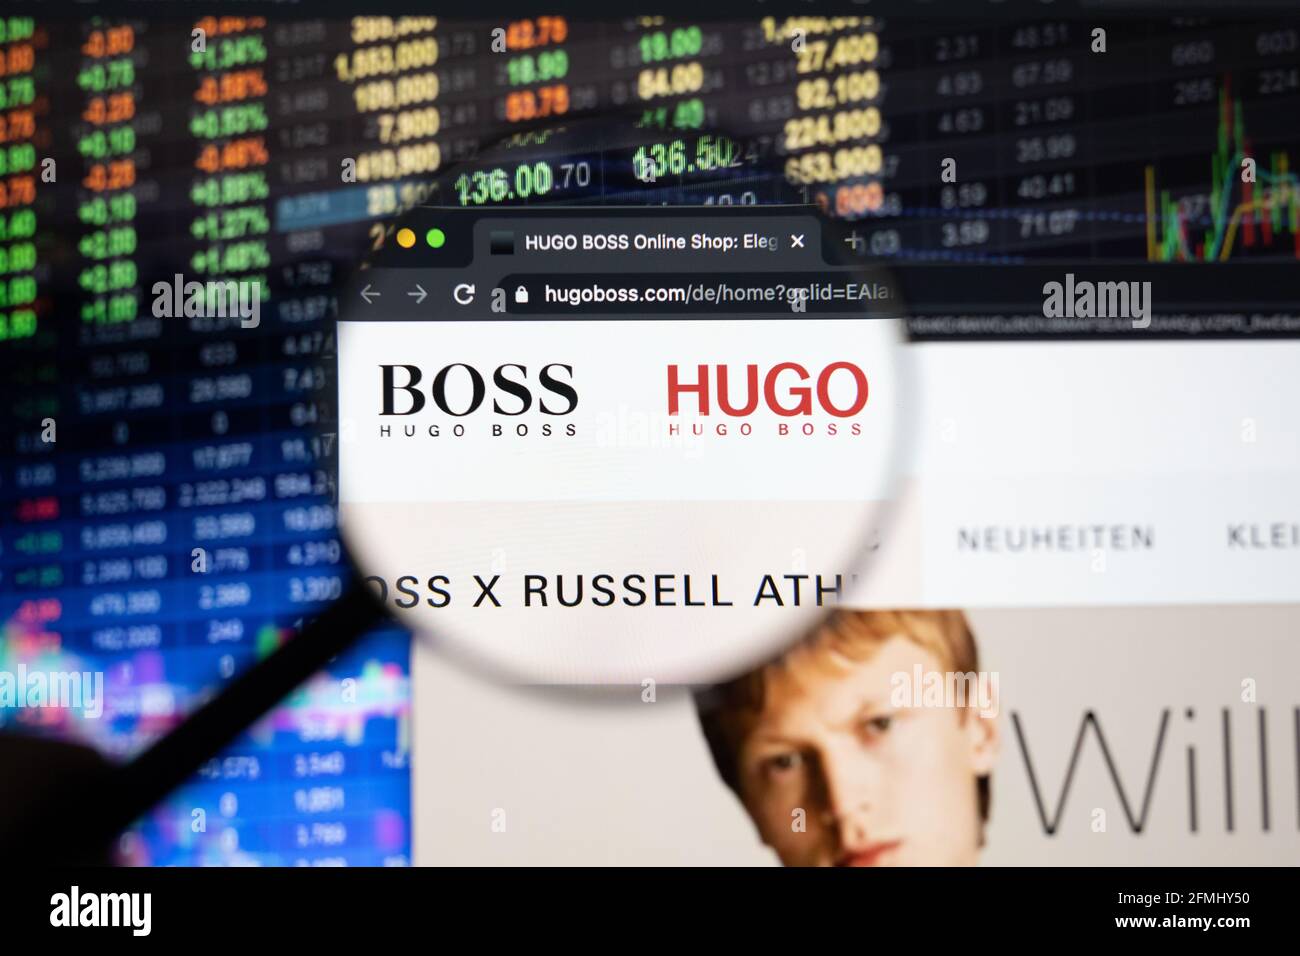 Hugo Boss company logo on a website with blurry stock market developments  in the background, seen on a computer screen through a magnifying glass  Stock Photo - Alamy